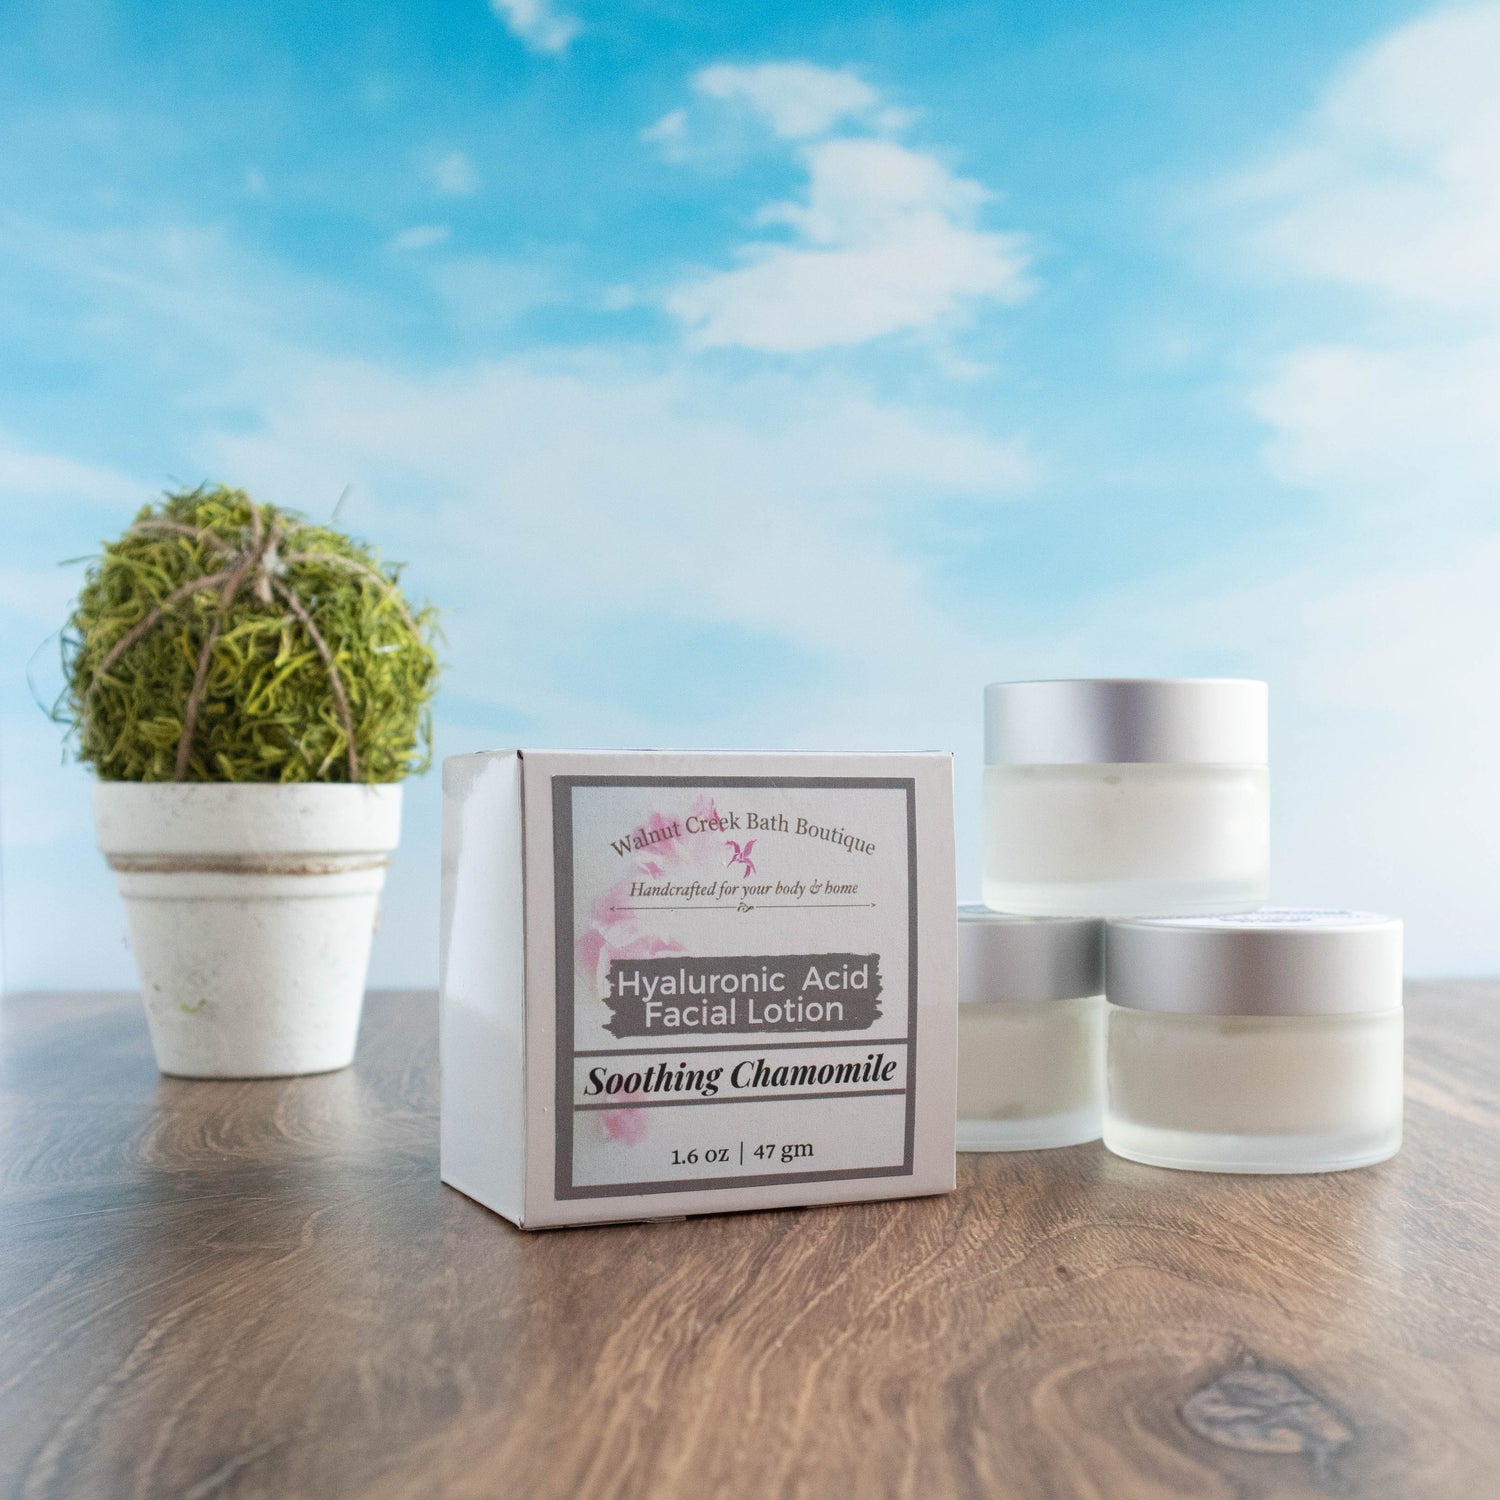 there are 3 hyaluronic acid face cream jars stacked to the right and slightly in front of this is a box which is the outer package of the product. there is a stone vase with a greenery ball. everything is sitting on a wood board and there is a sky background.